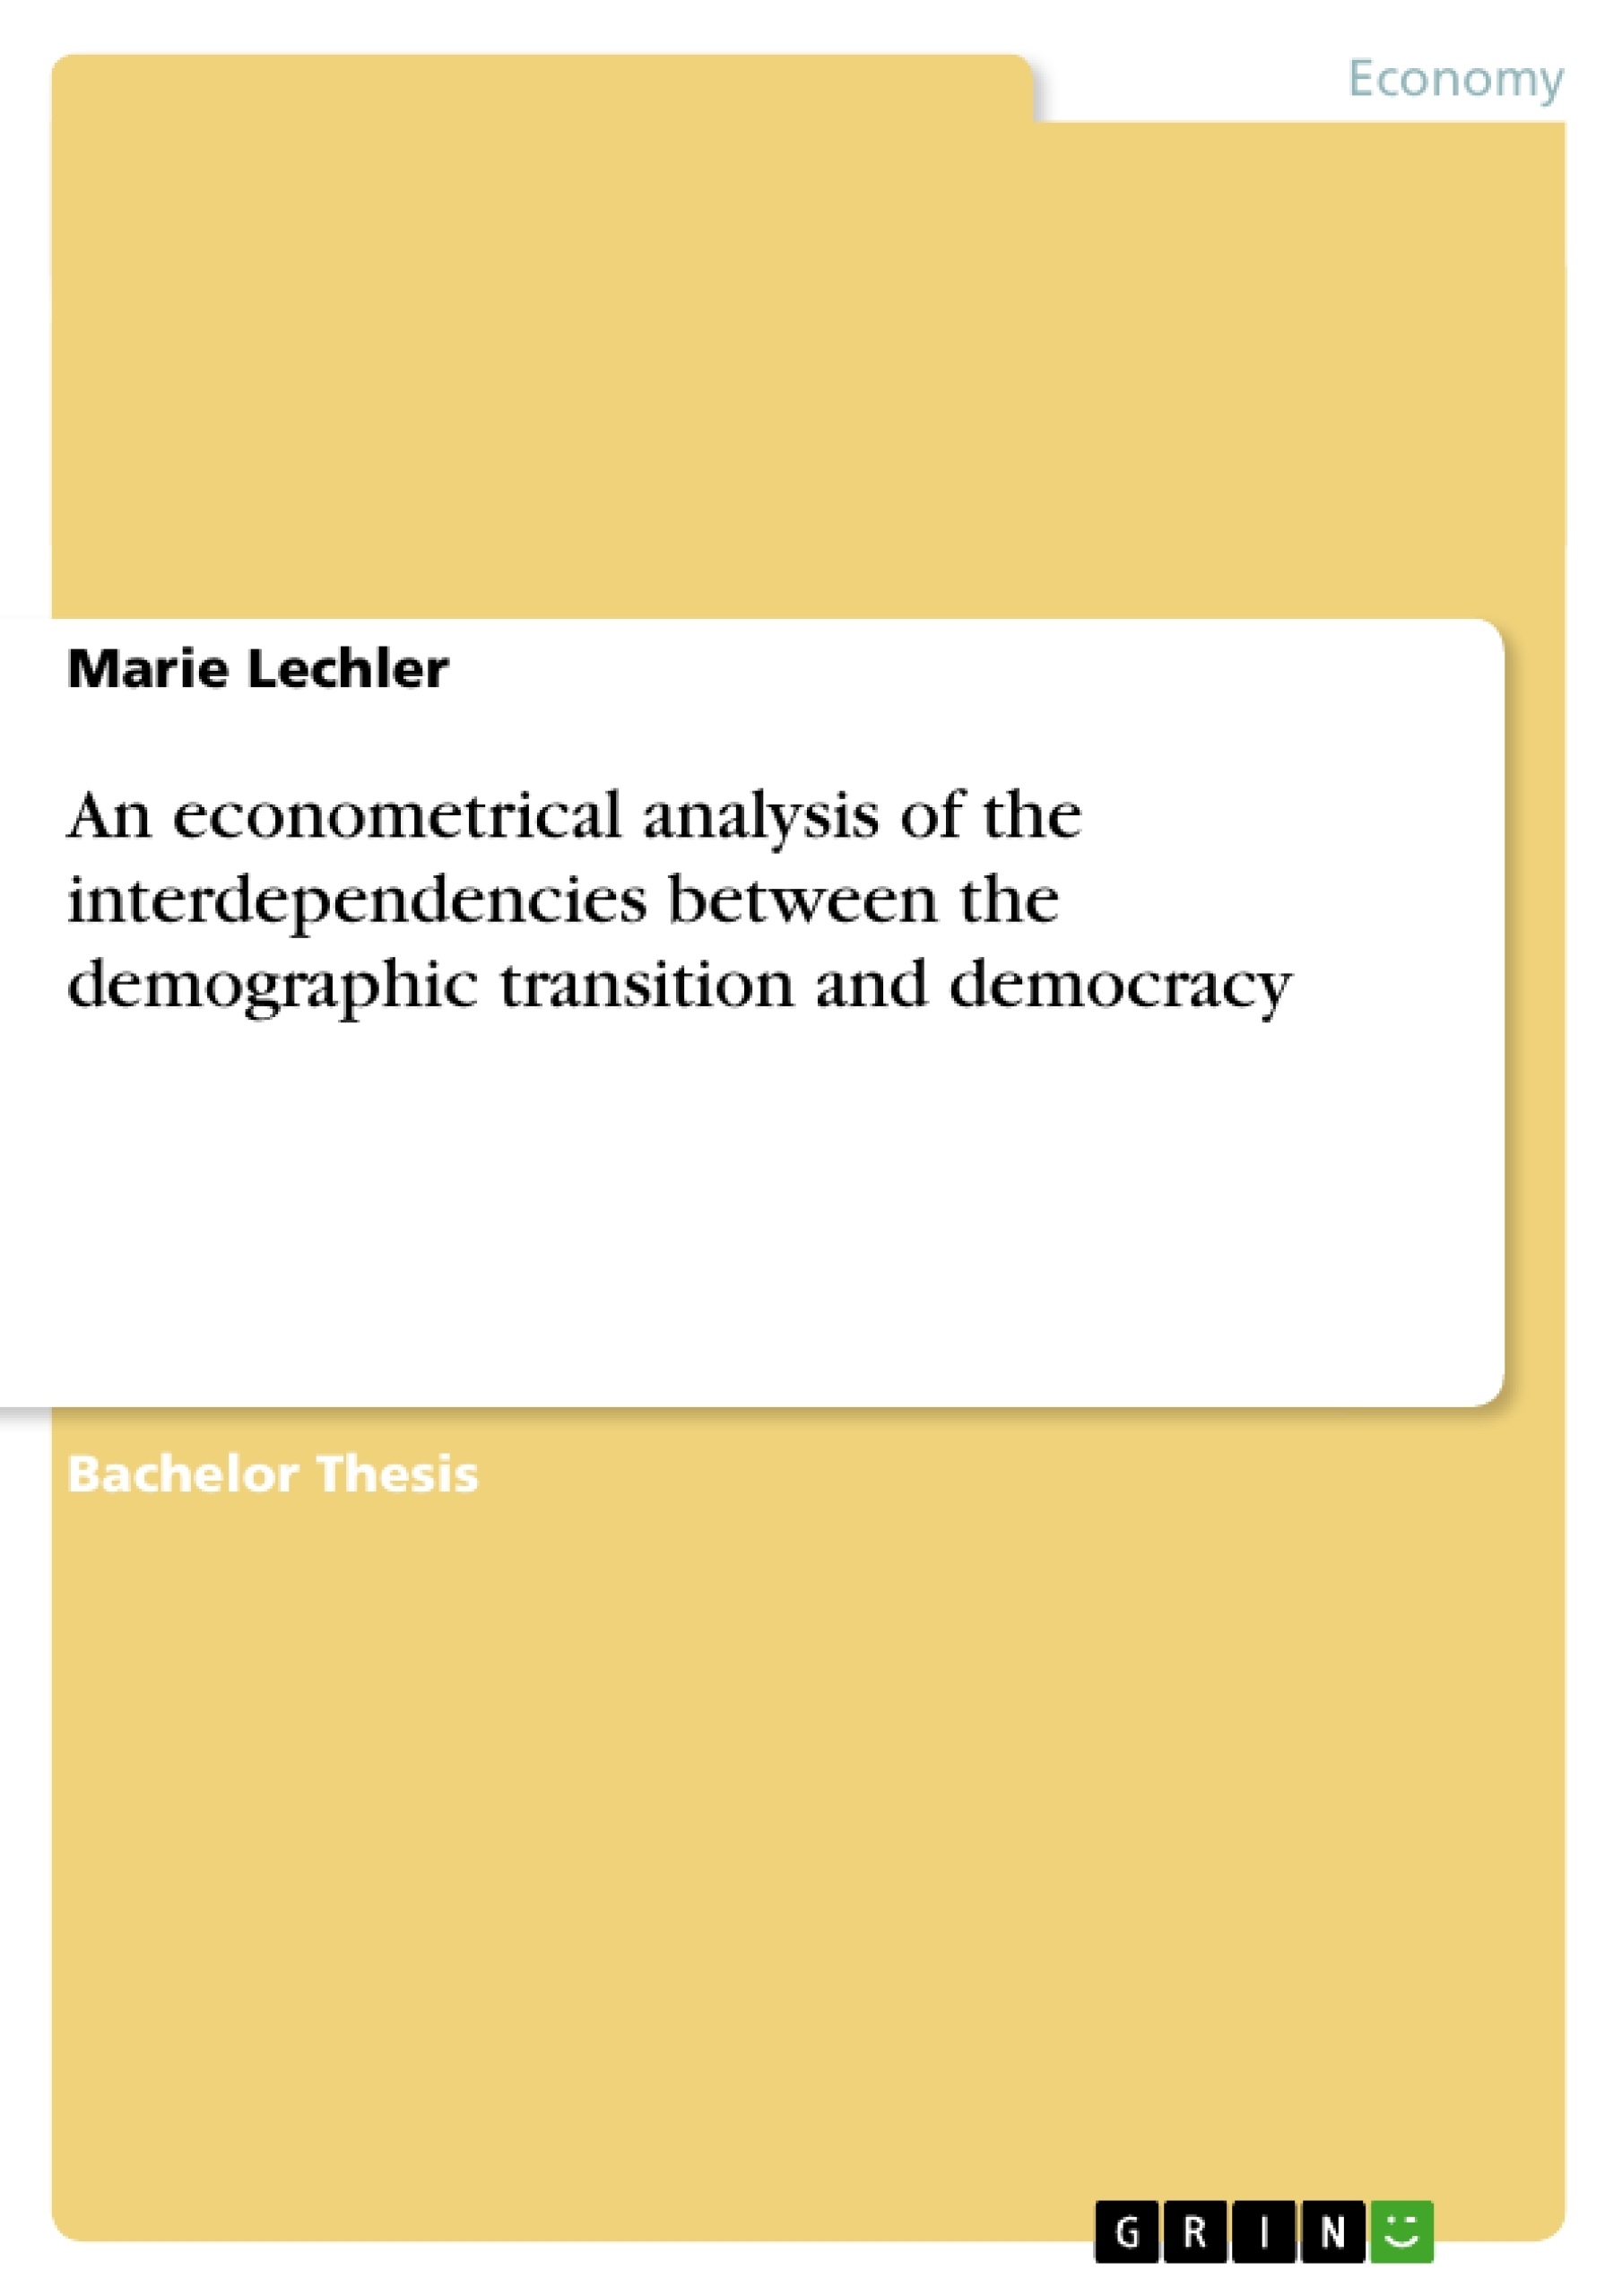 Titel: An econometrical analysis of the interdependencies between the demographic transition and democracy